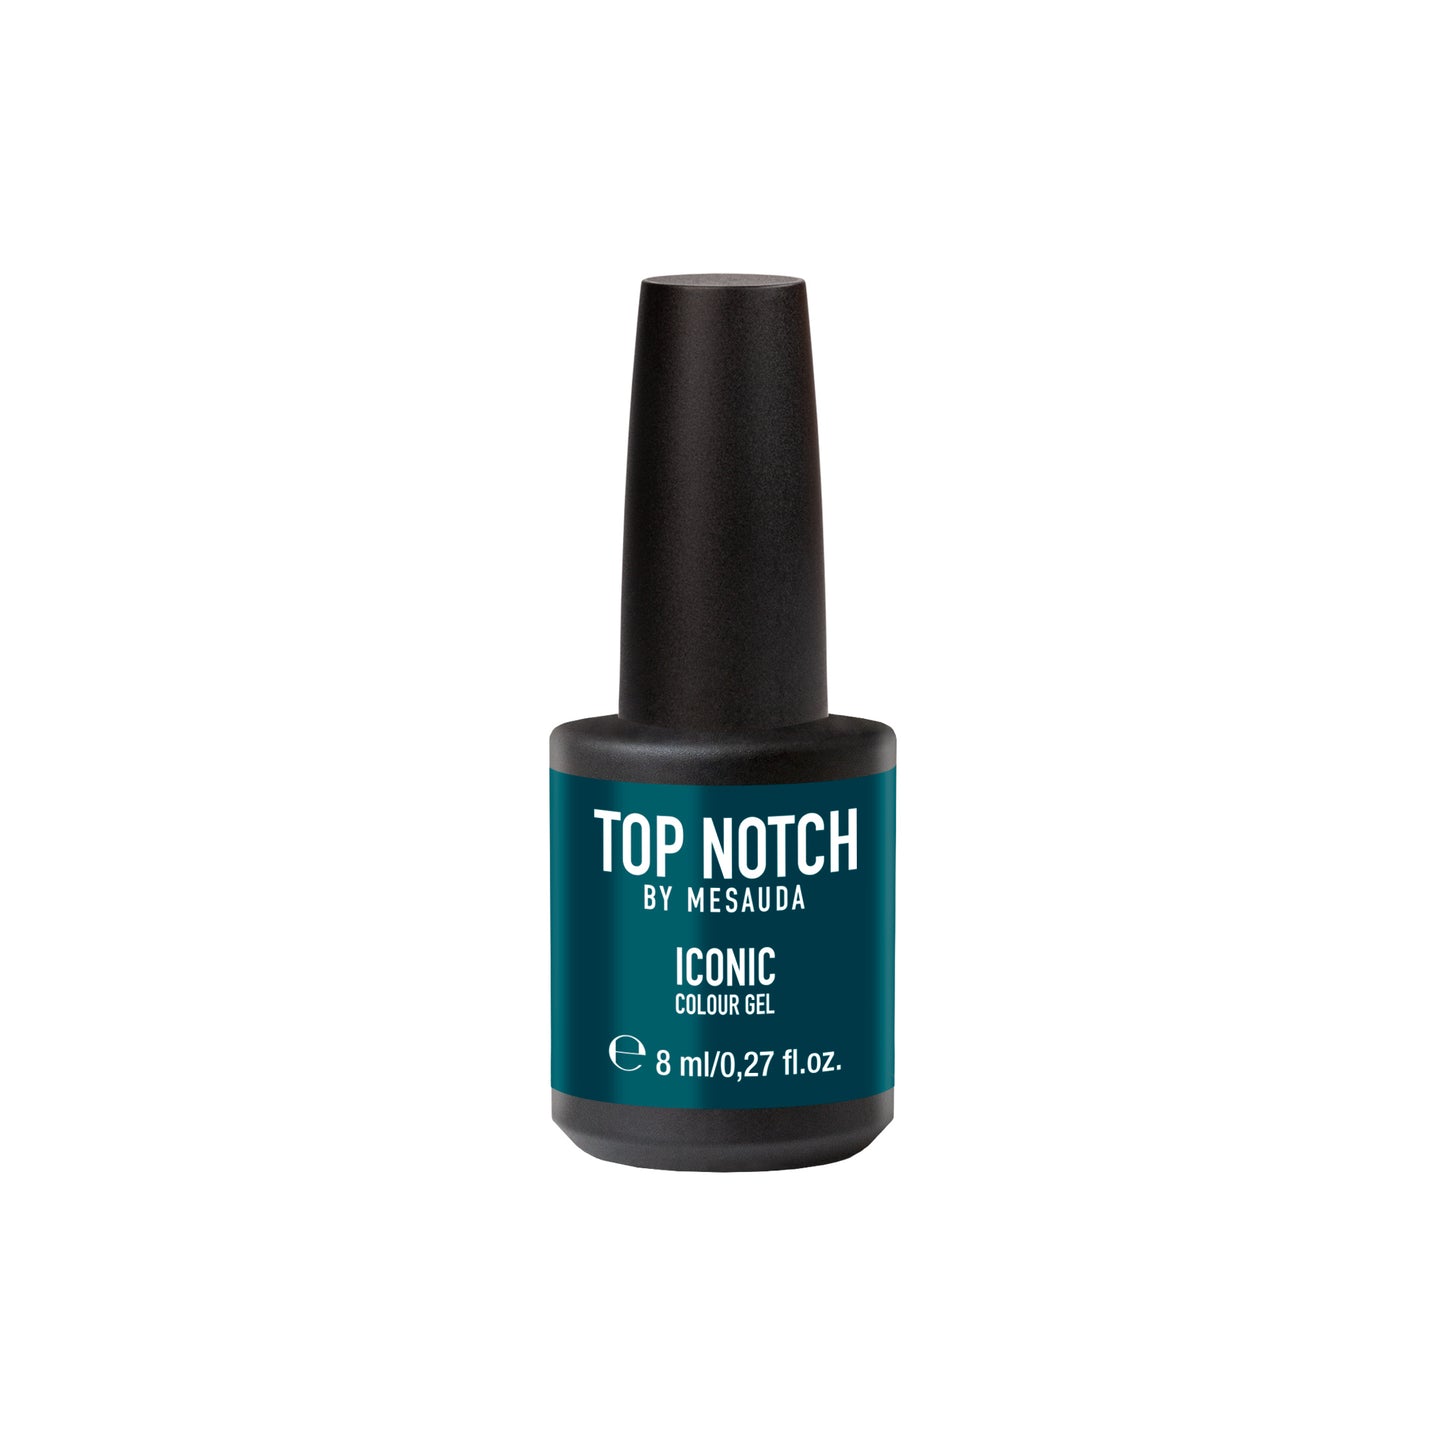 Mesauda - Top Notch Iconic 8ml - #253 Game Over